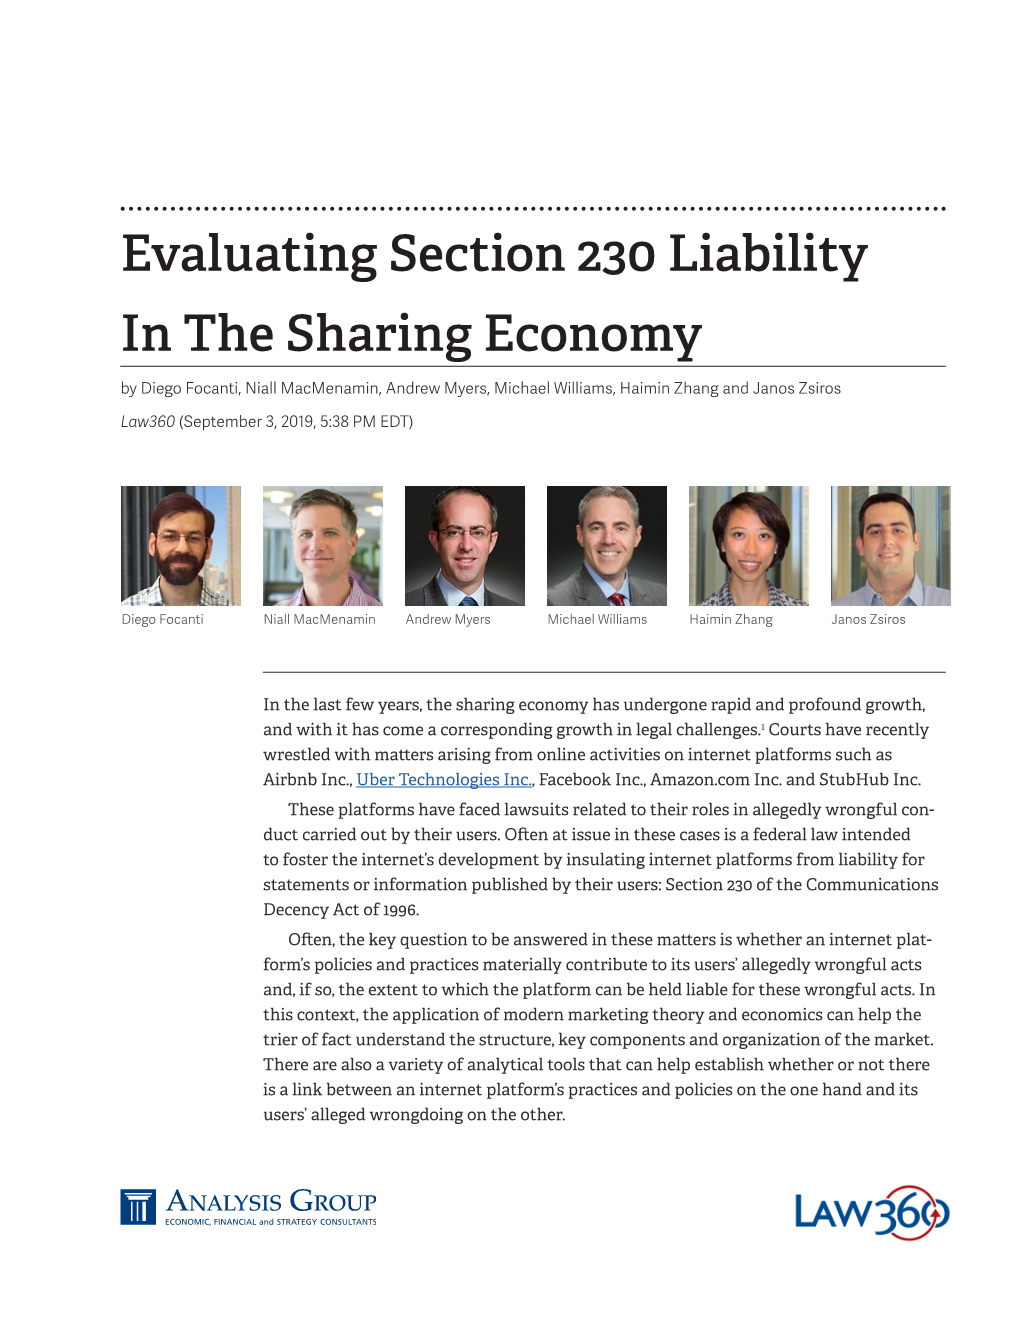 Evaluating Section 230 Liability in the Sharing Economy by Diego Focanti, Niall Macmenamin, Andrew Myers, Michael Williams, Haimin Zhang and Janos Zsiros